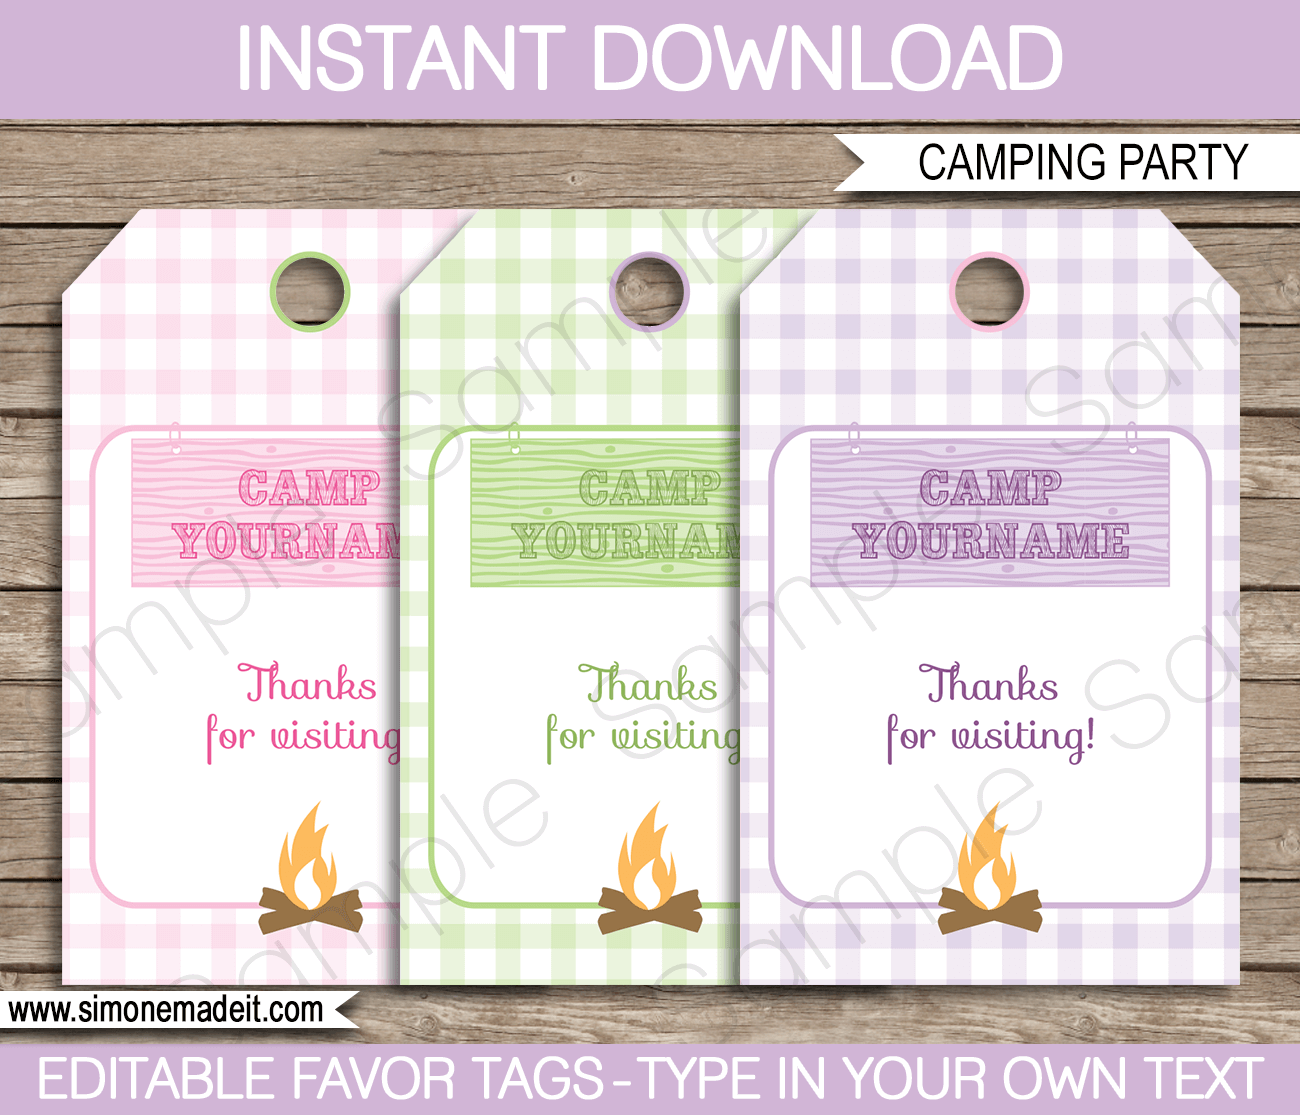 Glamping Party Favor Tags | Thank You Tags | Birthday Party | Editable DIY Template | $3.00 INSTANT DOWNLOAD via SIMONEmadeit.com